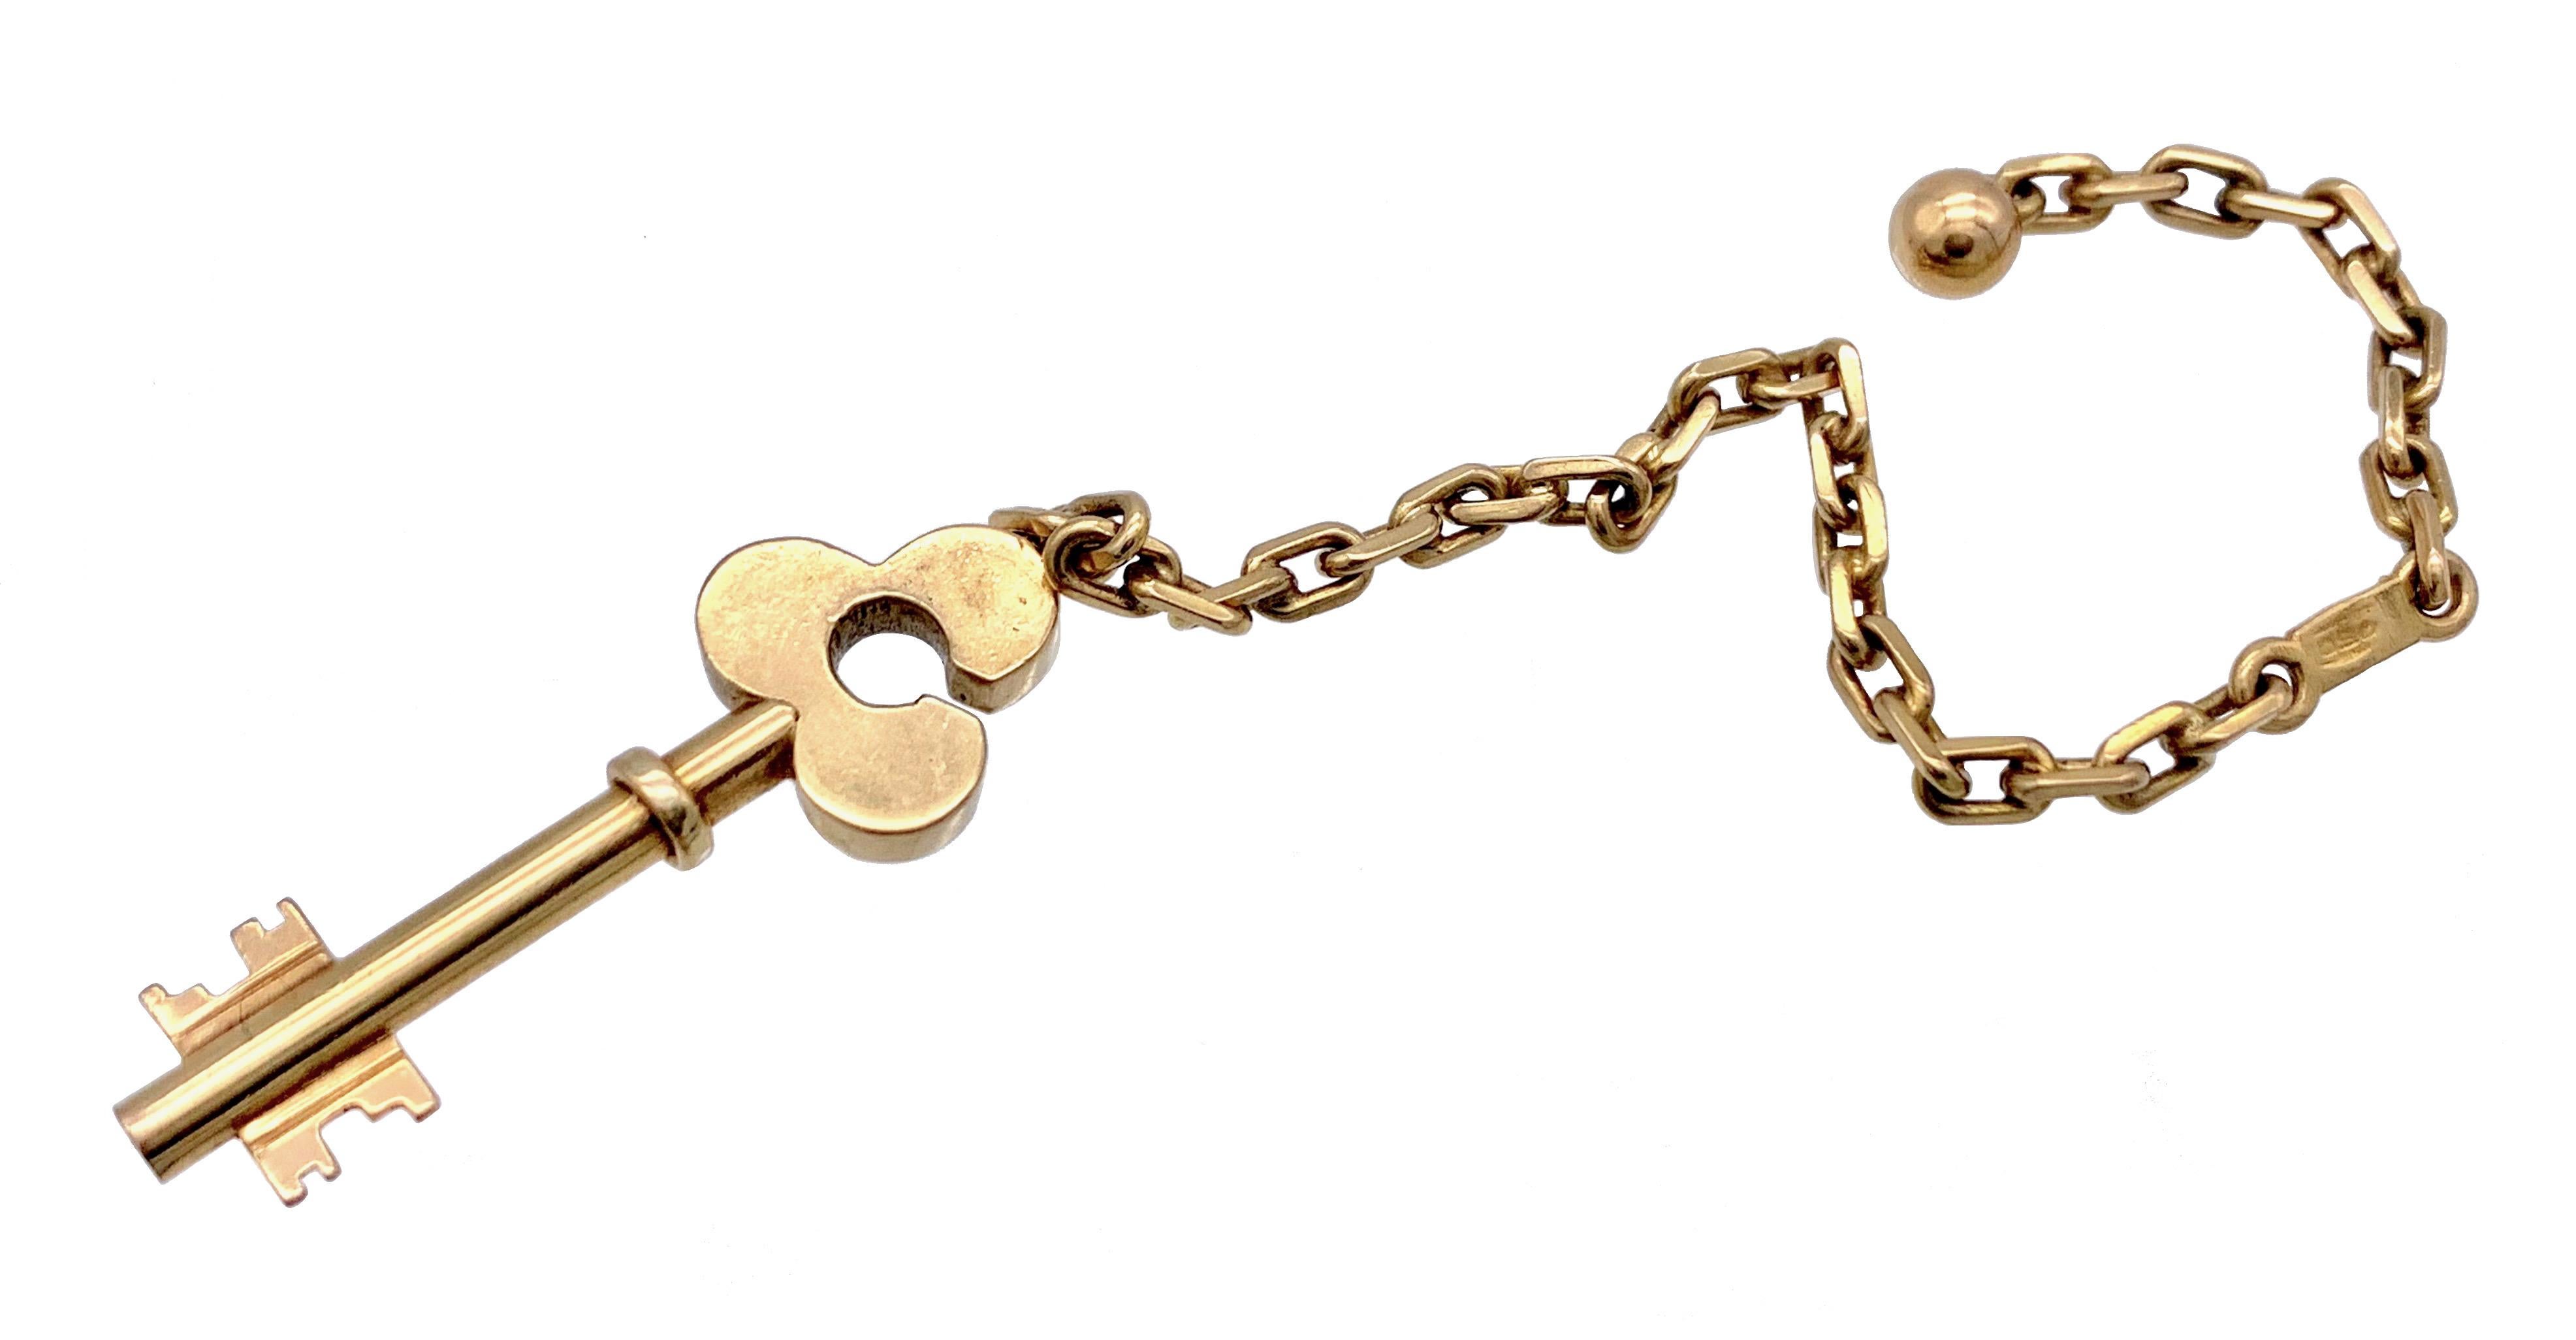 This amusing key holder in the shape of a key attached to a gold chain is fastened with a gold ball that secures the chain in the key head.